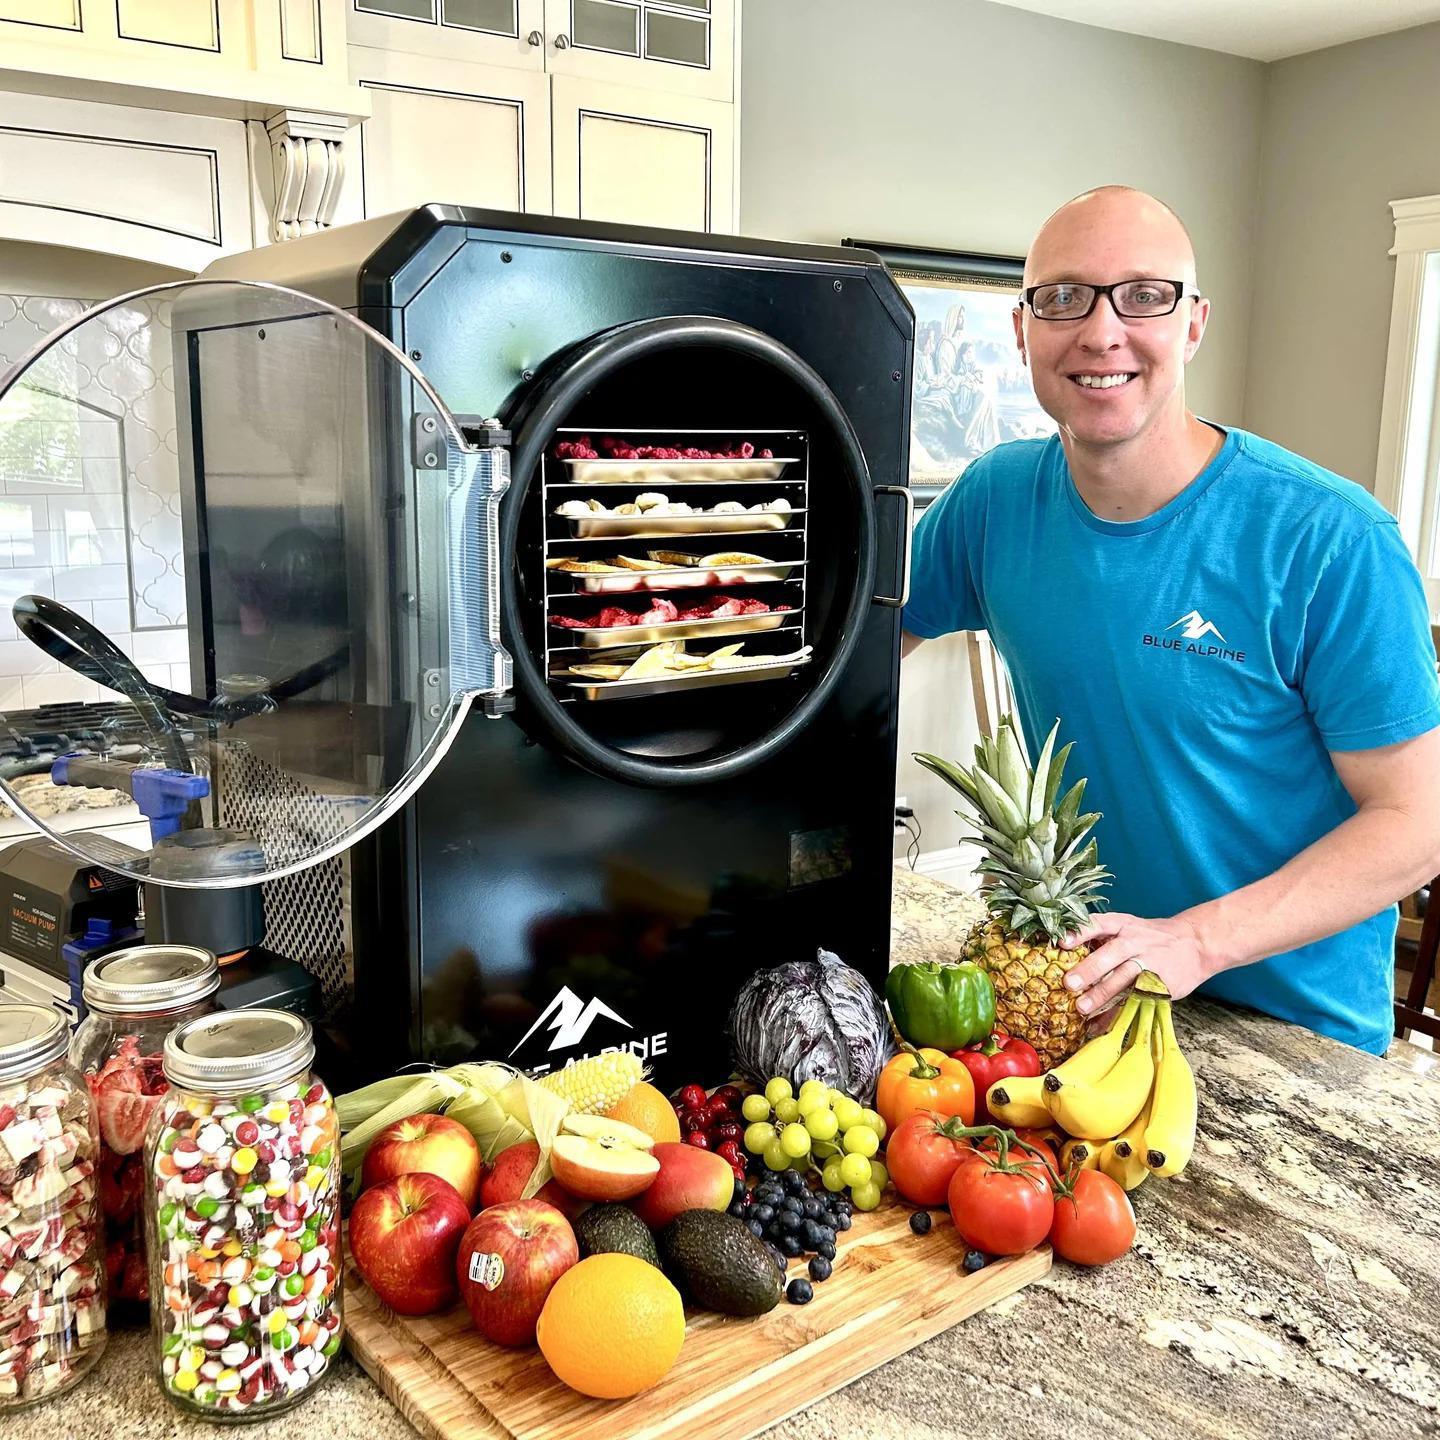 This image captures a moment in a well-lit, spacious kitchen where an individual with their face obscured is presenting a variety of fresh fruits and candies. The person is standing next to a large, black BLUE ALPINE dehydrator filled with slices of fruits. The countertop is adorned with an array of colorful fruits including bananas, apples, grapes, and a pineapple, as well as jars filled with assorted candies.